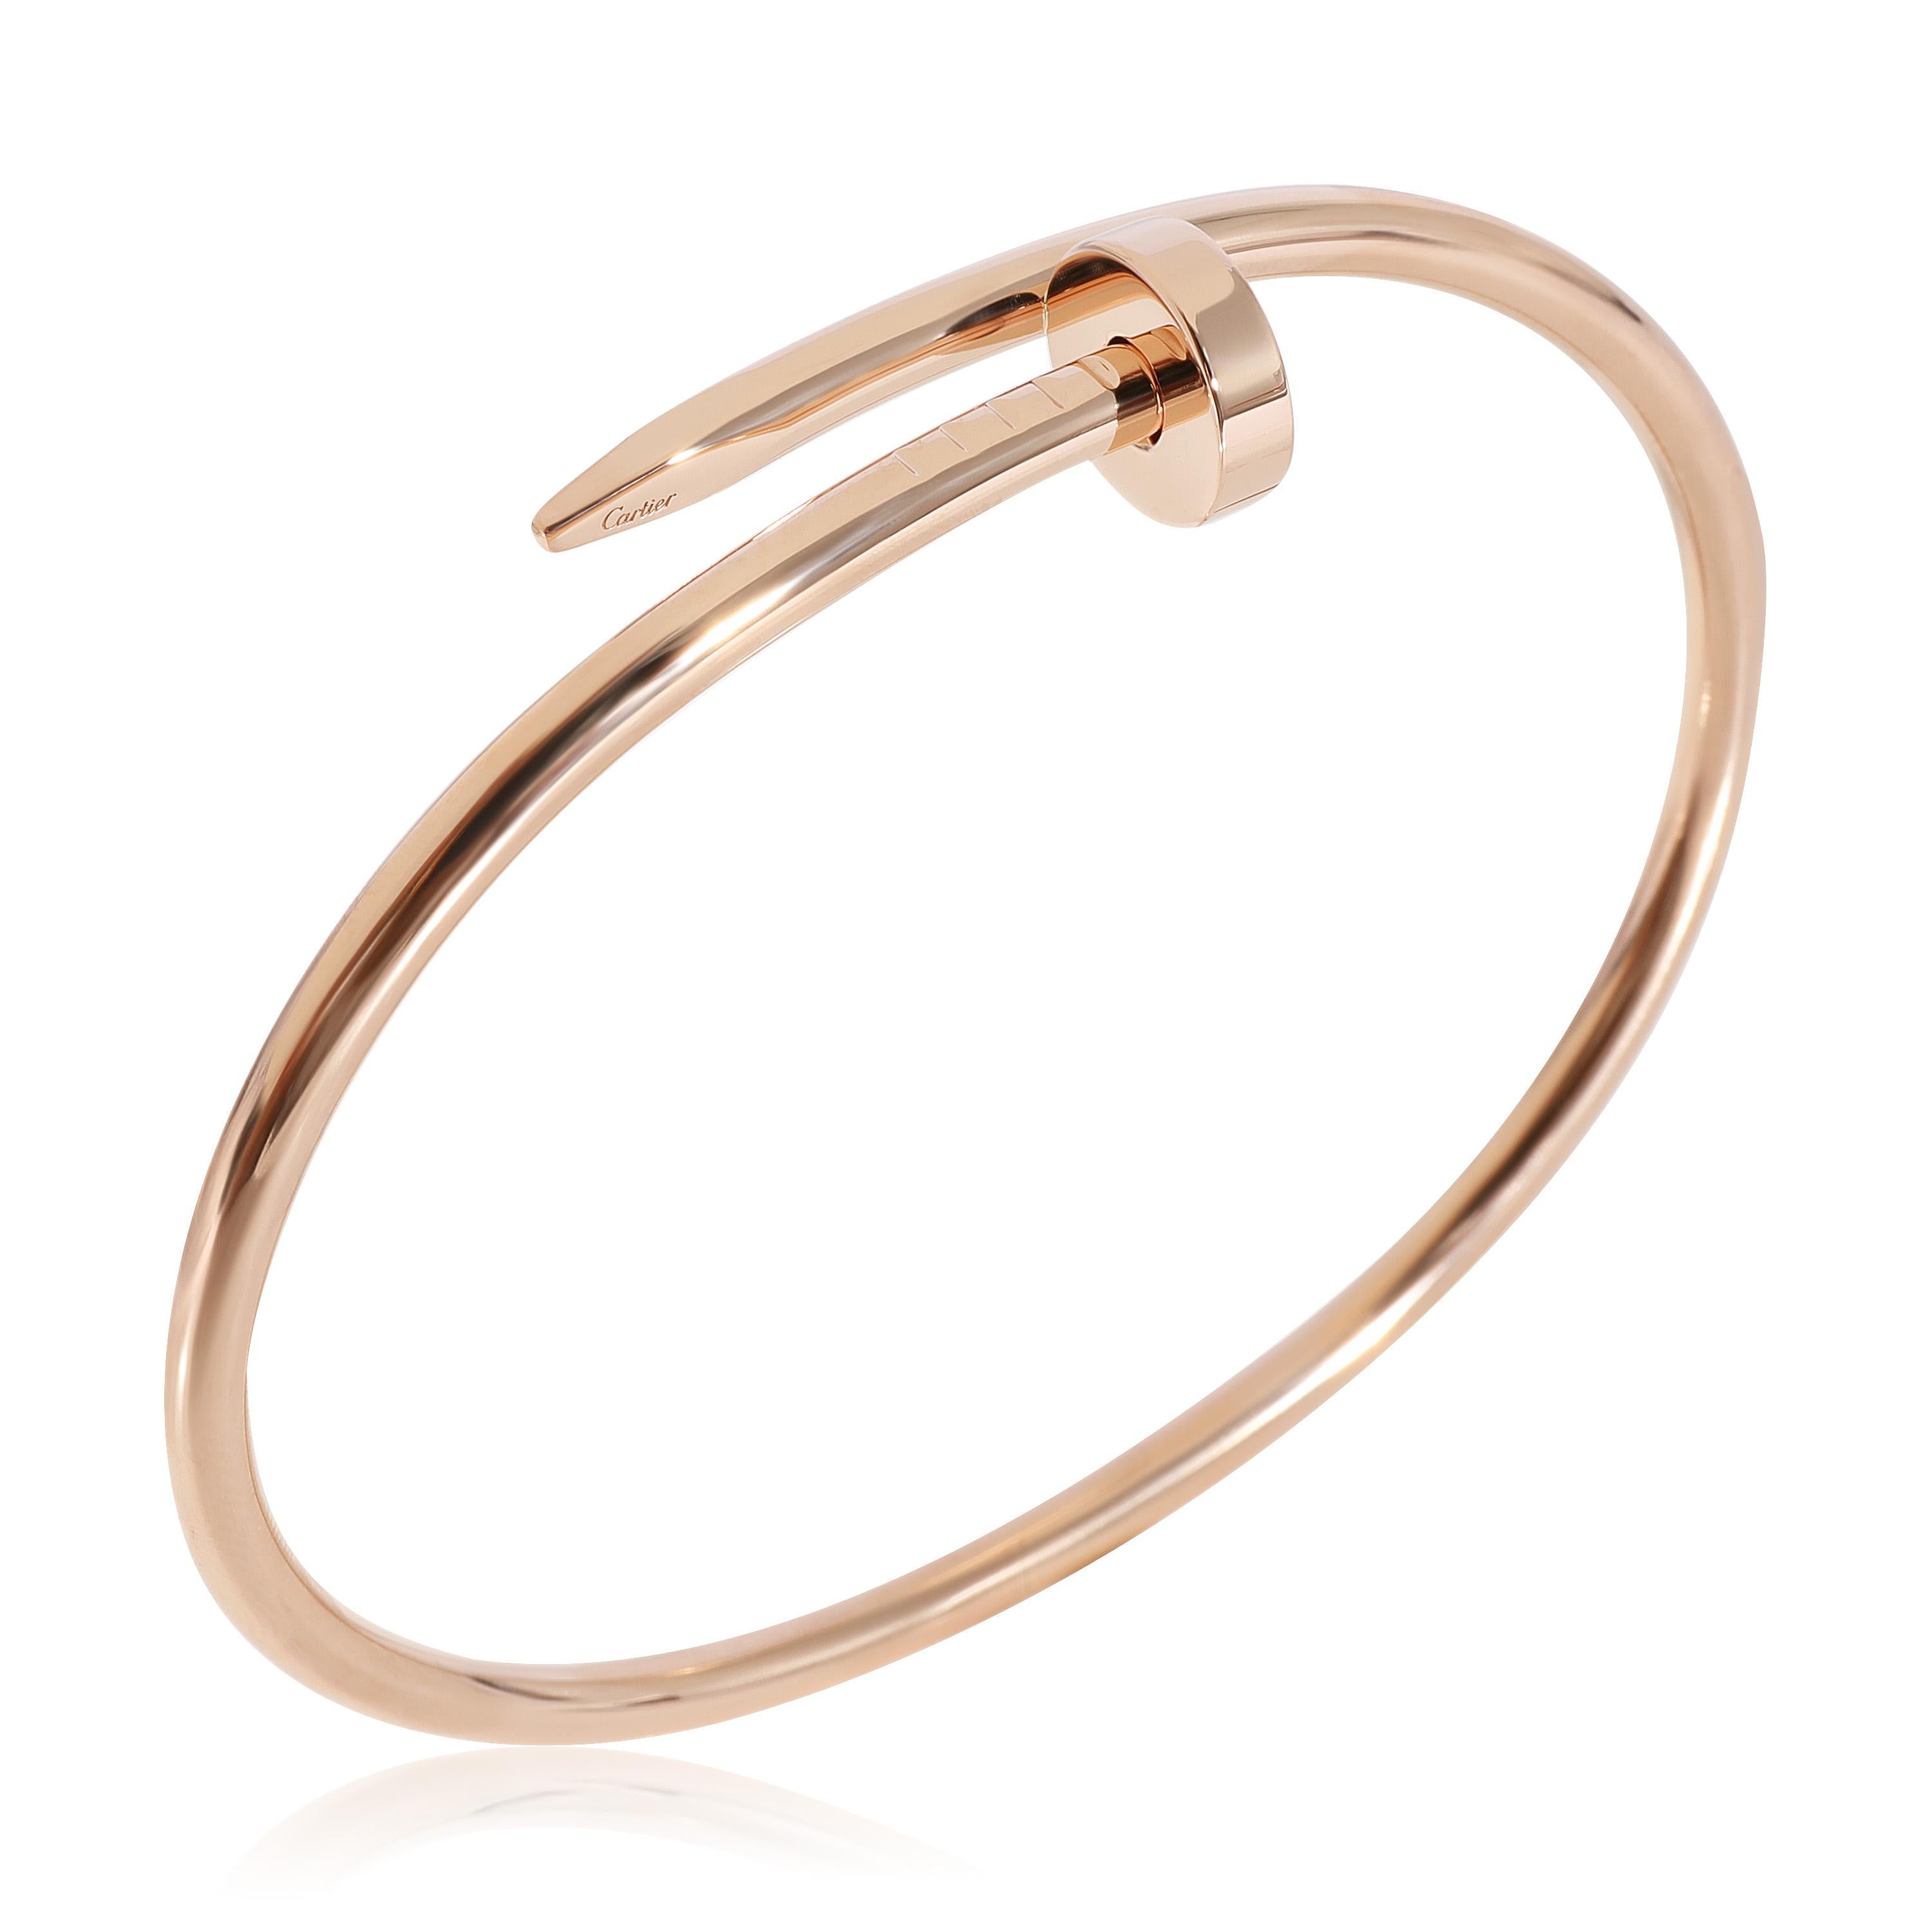 Cartier Juste Un Clou Bracelet in 18k Rose Gold

PRIMARY DETAILS
SKU: 124483
Listing Title: Cartier Juste Un Clou Bracelet in 18k Rose Gold
Condition Description: Retails for 7500 USD. In excellent condition and recently polished. 20 inches in